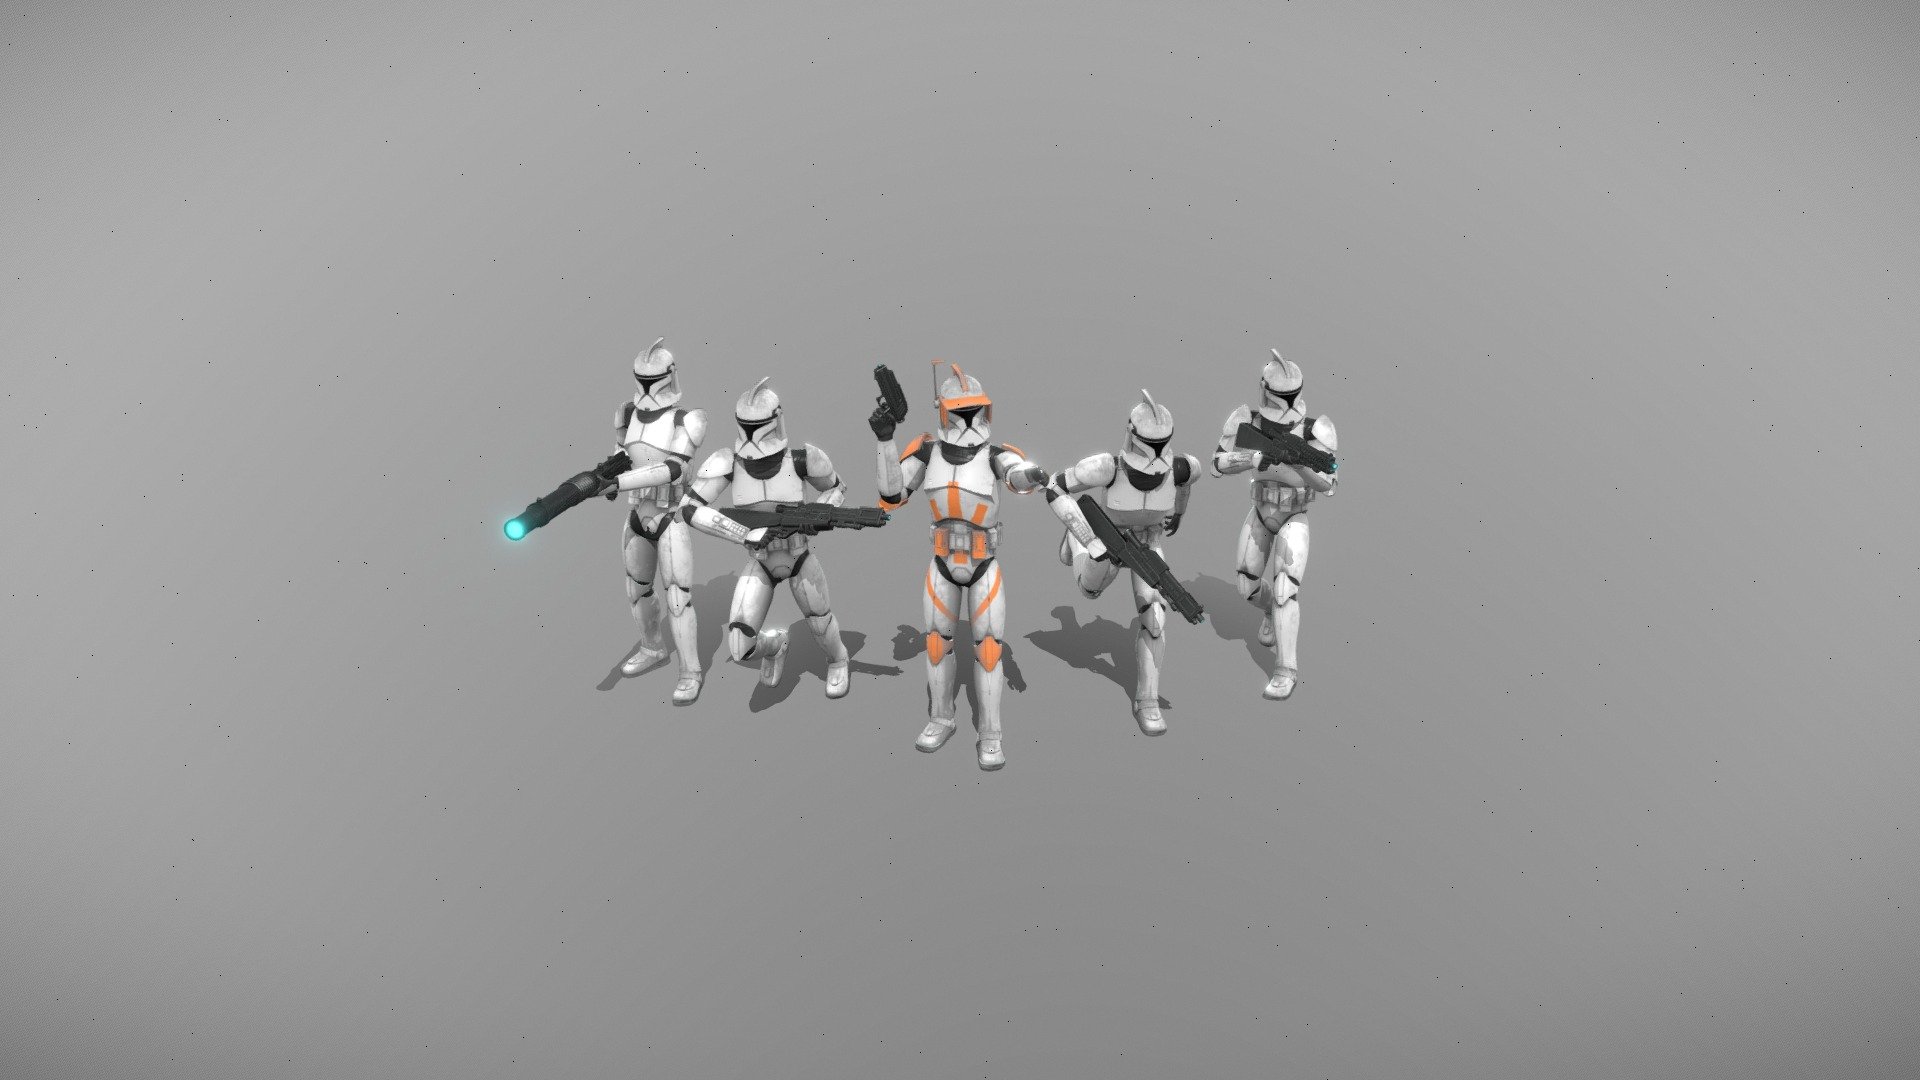 I made some phase 1 clones from Star Wars, with comander Cody leading them!
Entirely made in Maya and textured in Substance Painter 3d model